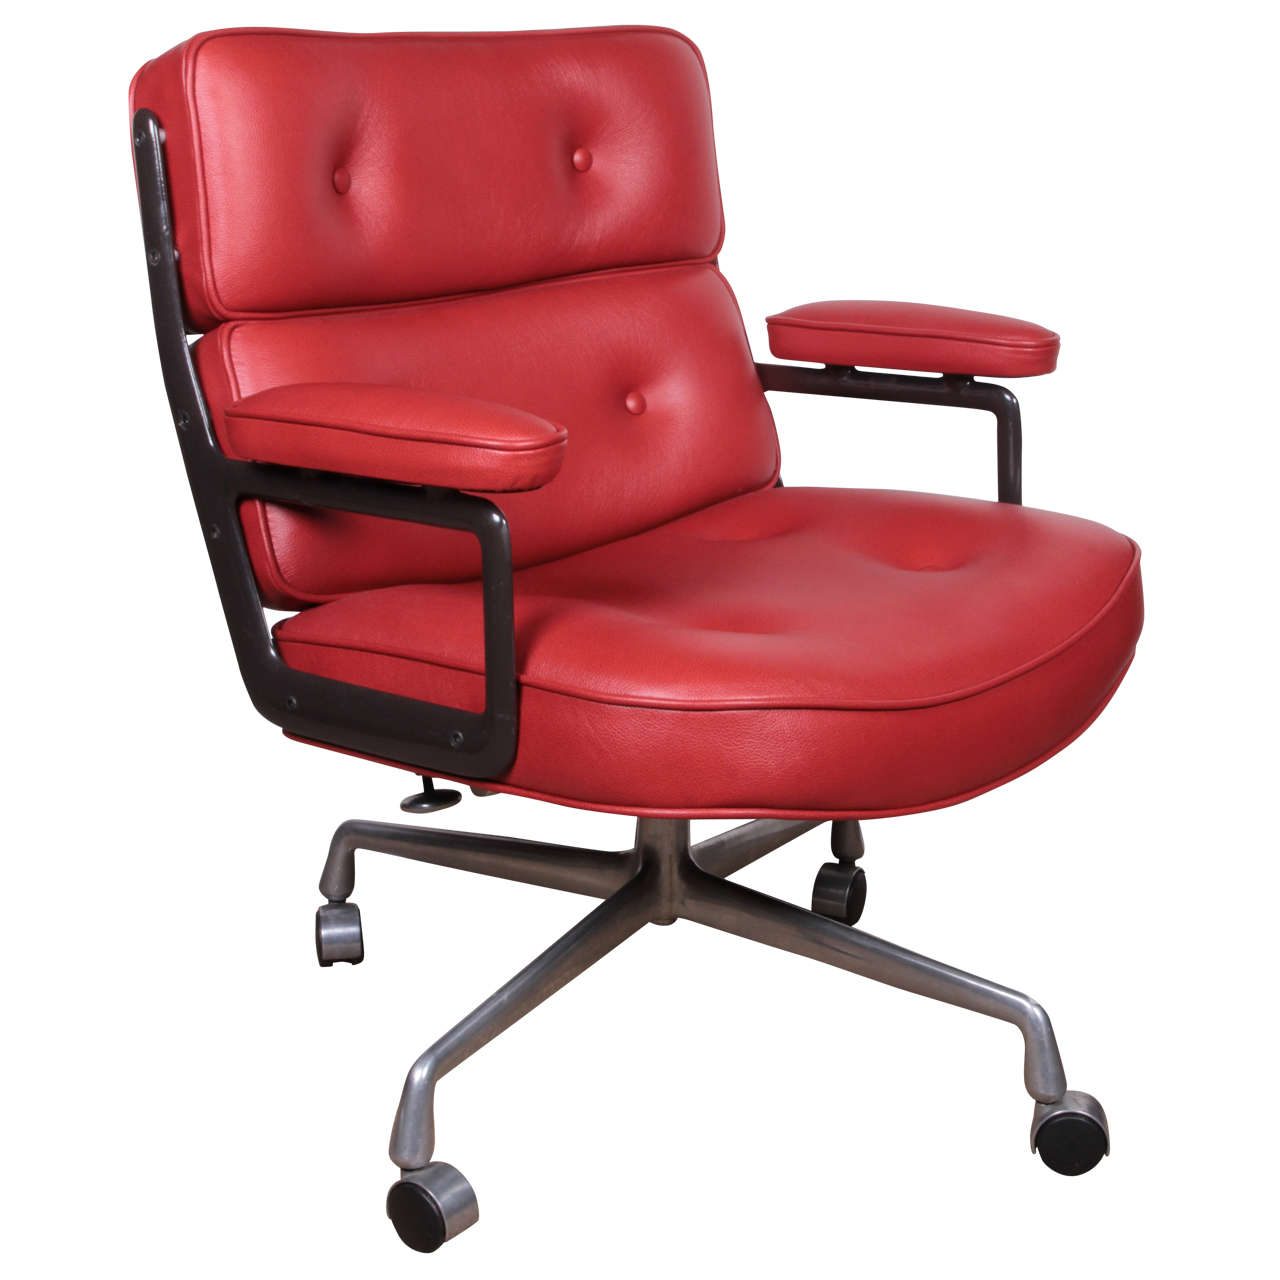 Charles Eames Executive Time Life Desk Chair